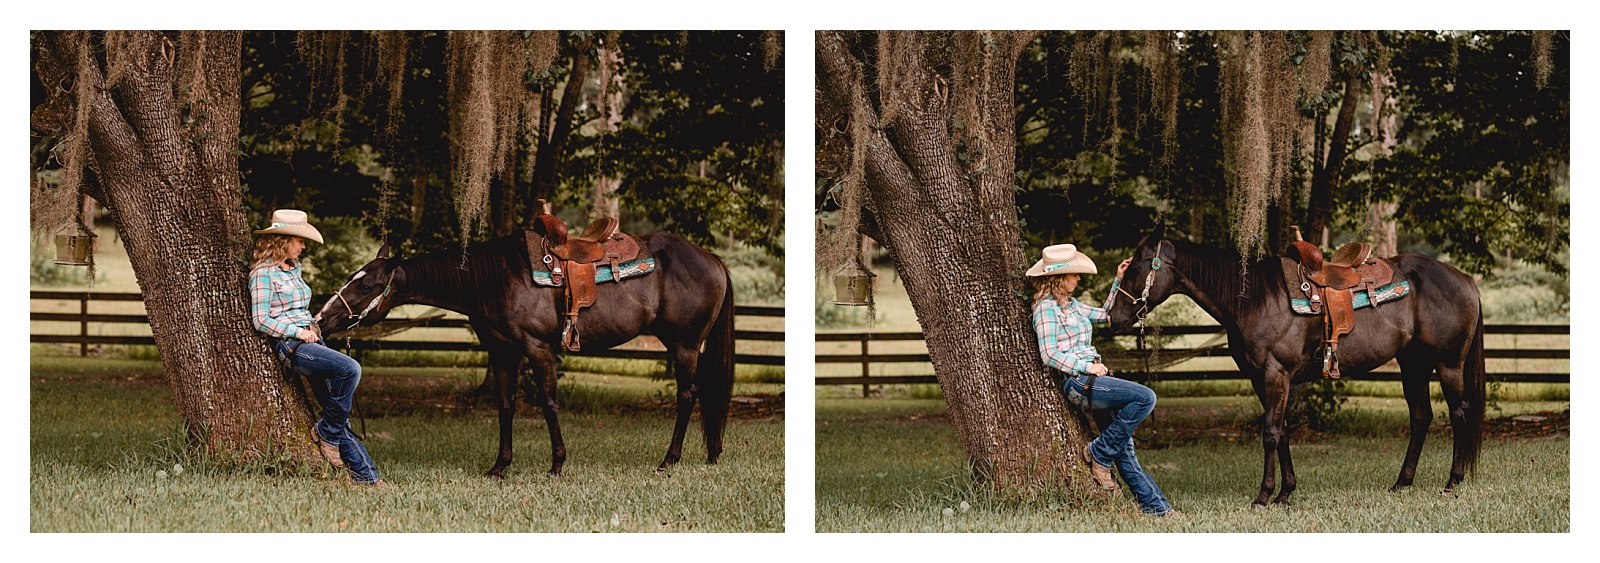 Barrel racer and her horse posing for photography in Tallahassee, Florida. Shelly Williams Photography